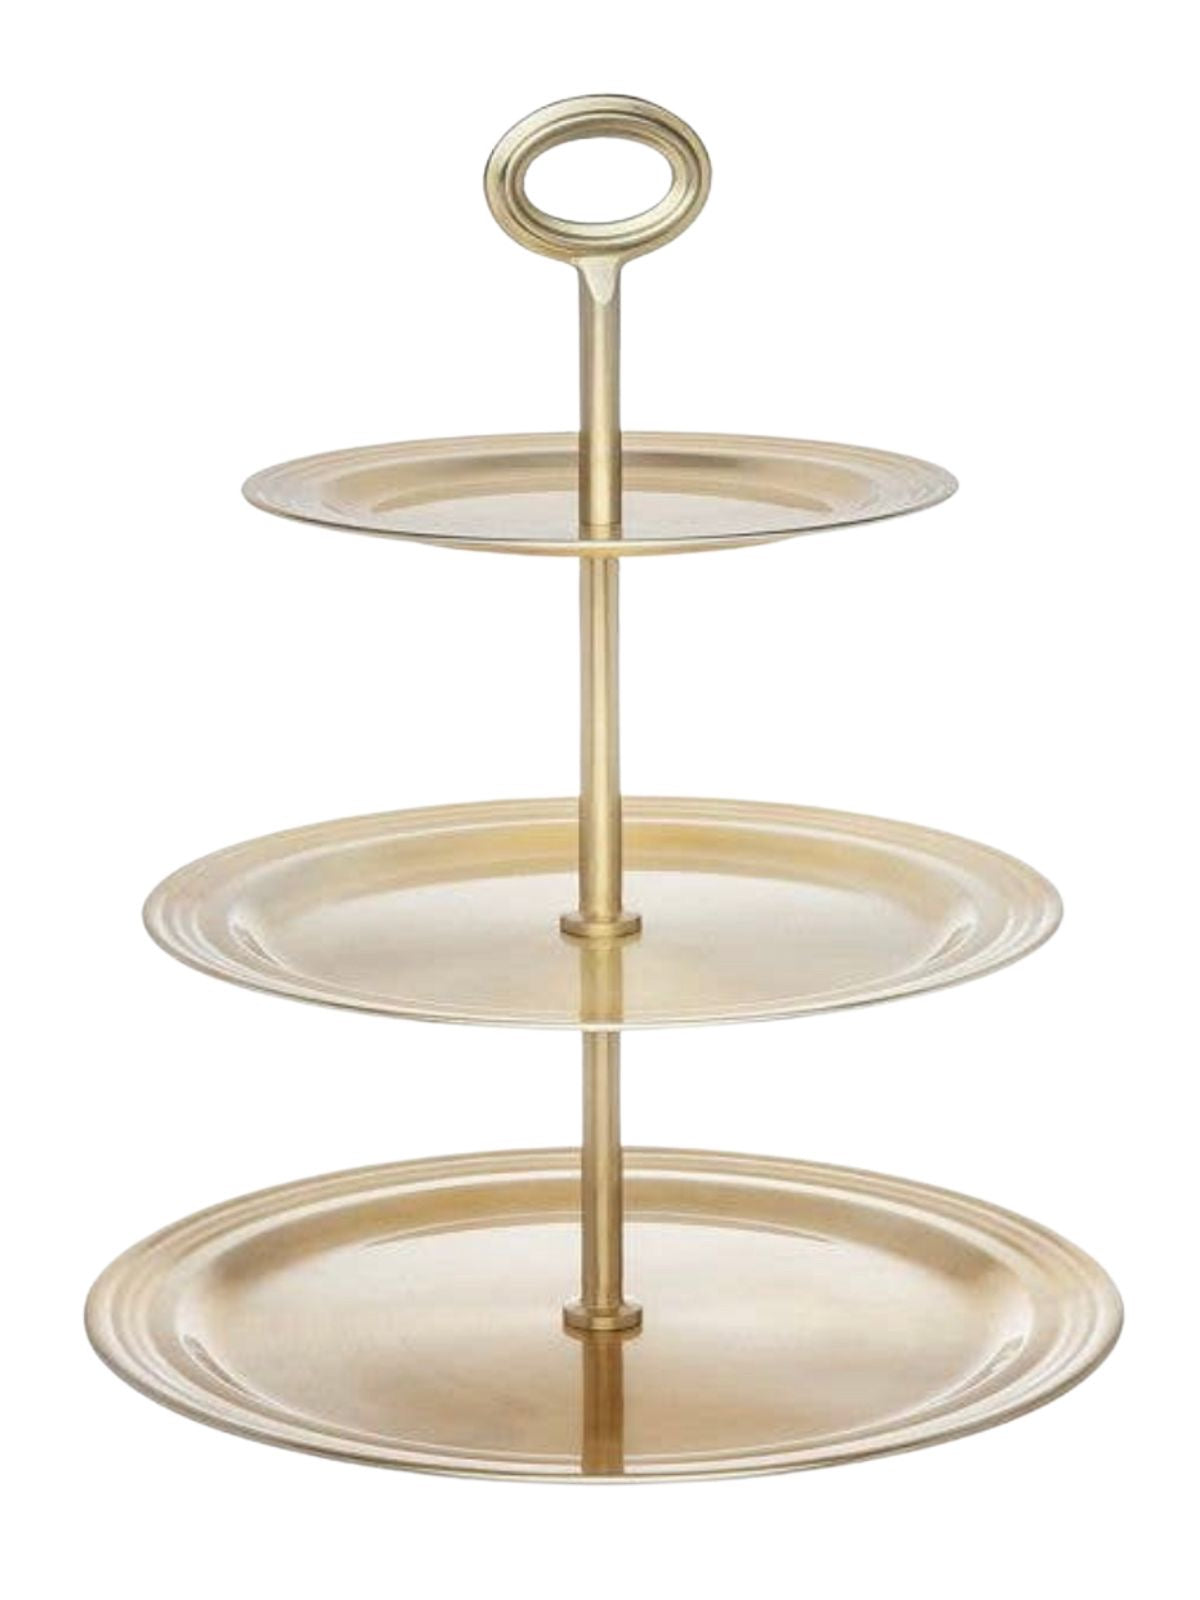 This chic server features three different trays crafted of stainless steel that's contrasted by the rich champagne gold center support Available at KYA Home Decor 